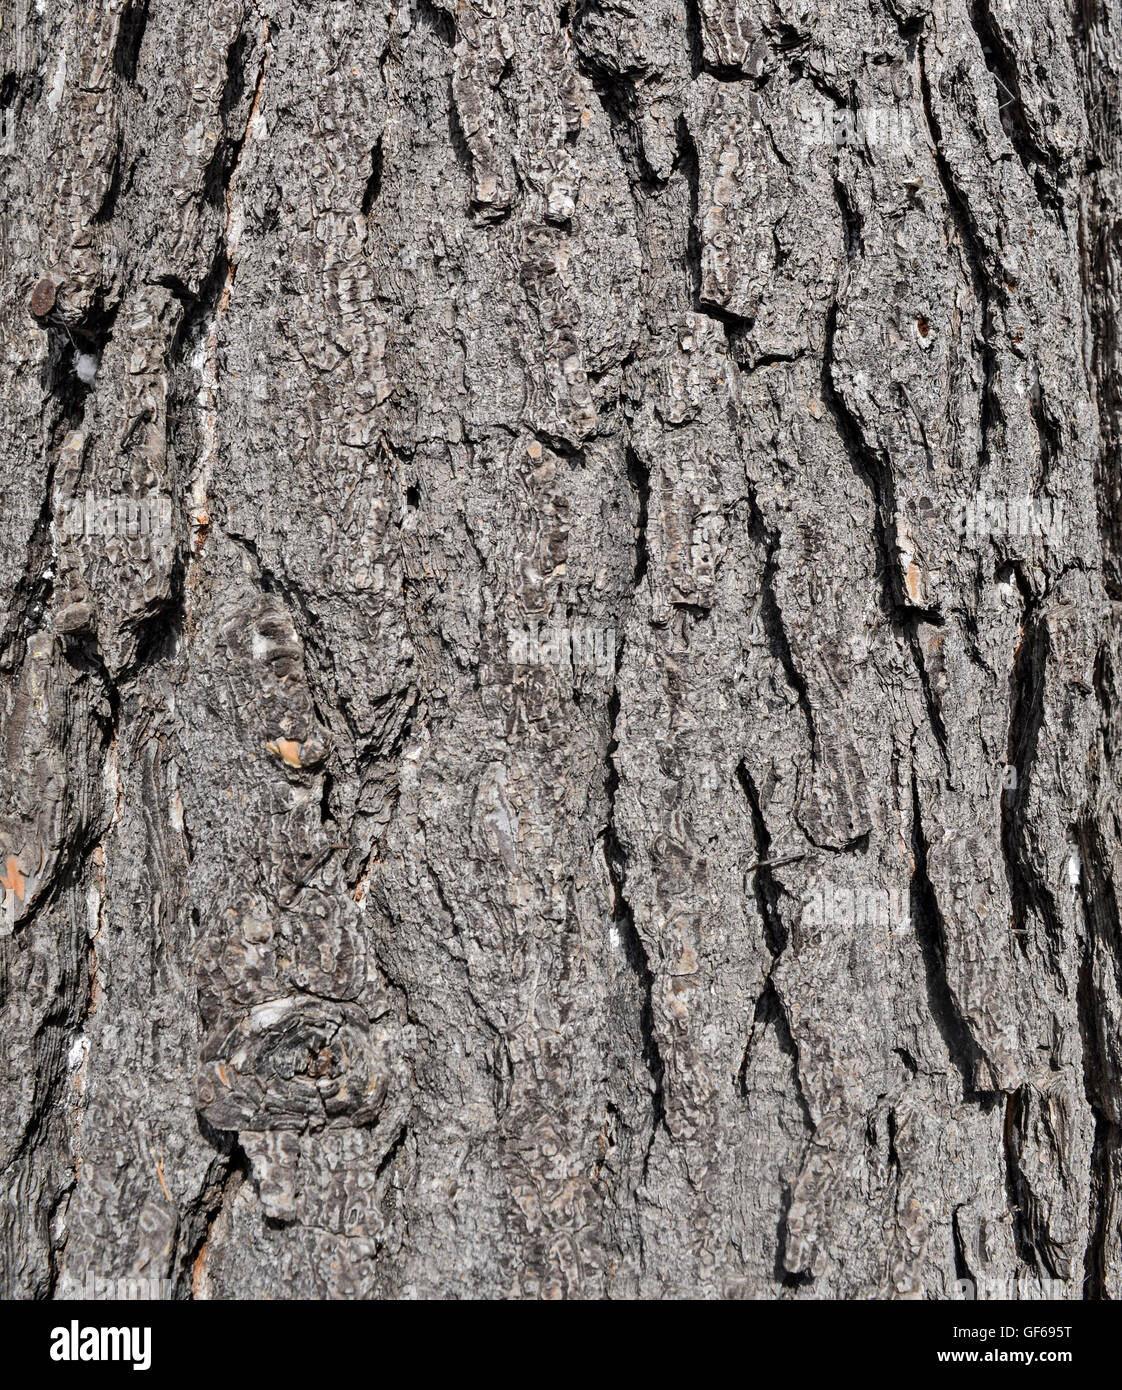 The bark on old wood, carved with age. Stock Photo